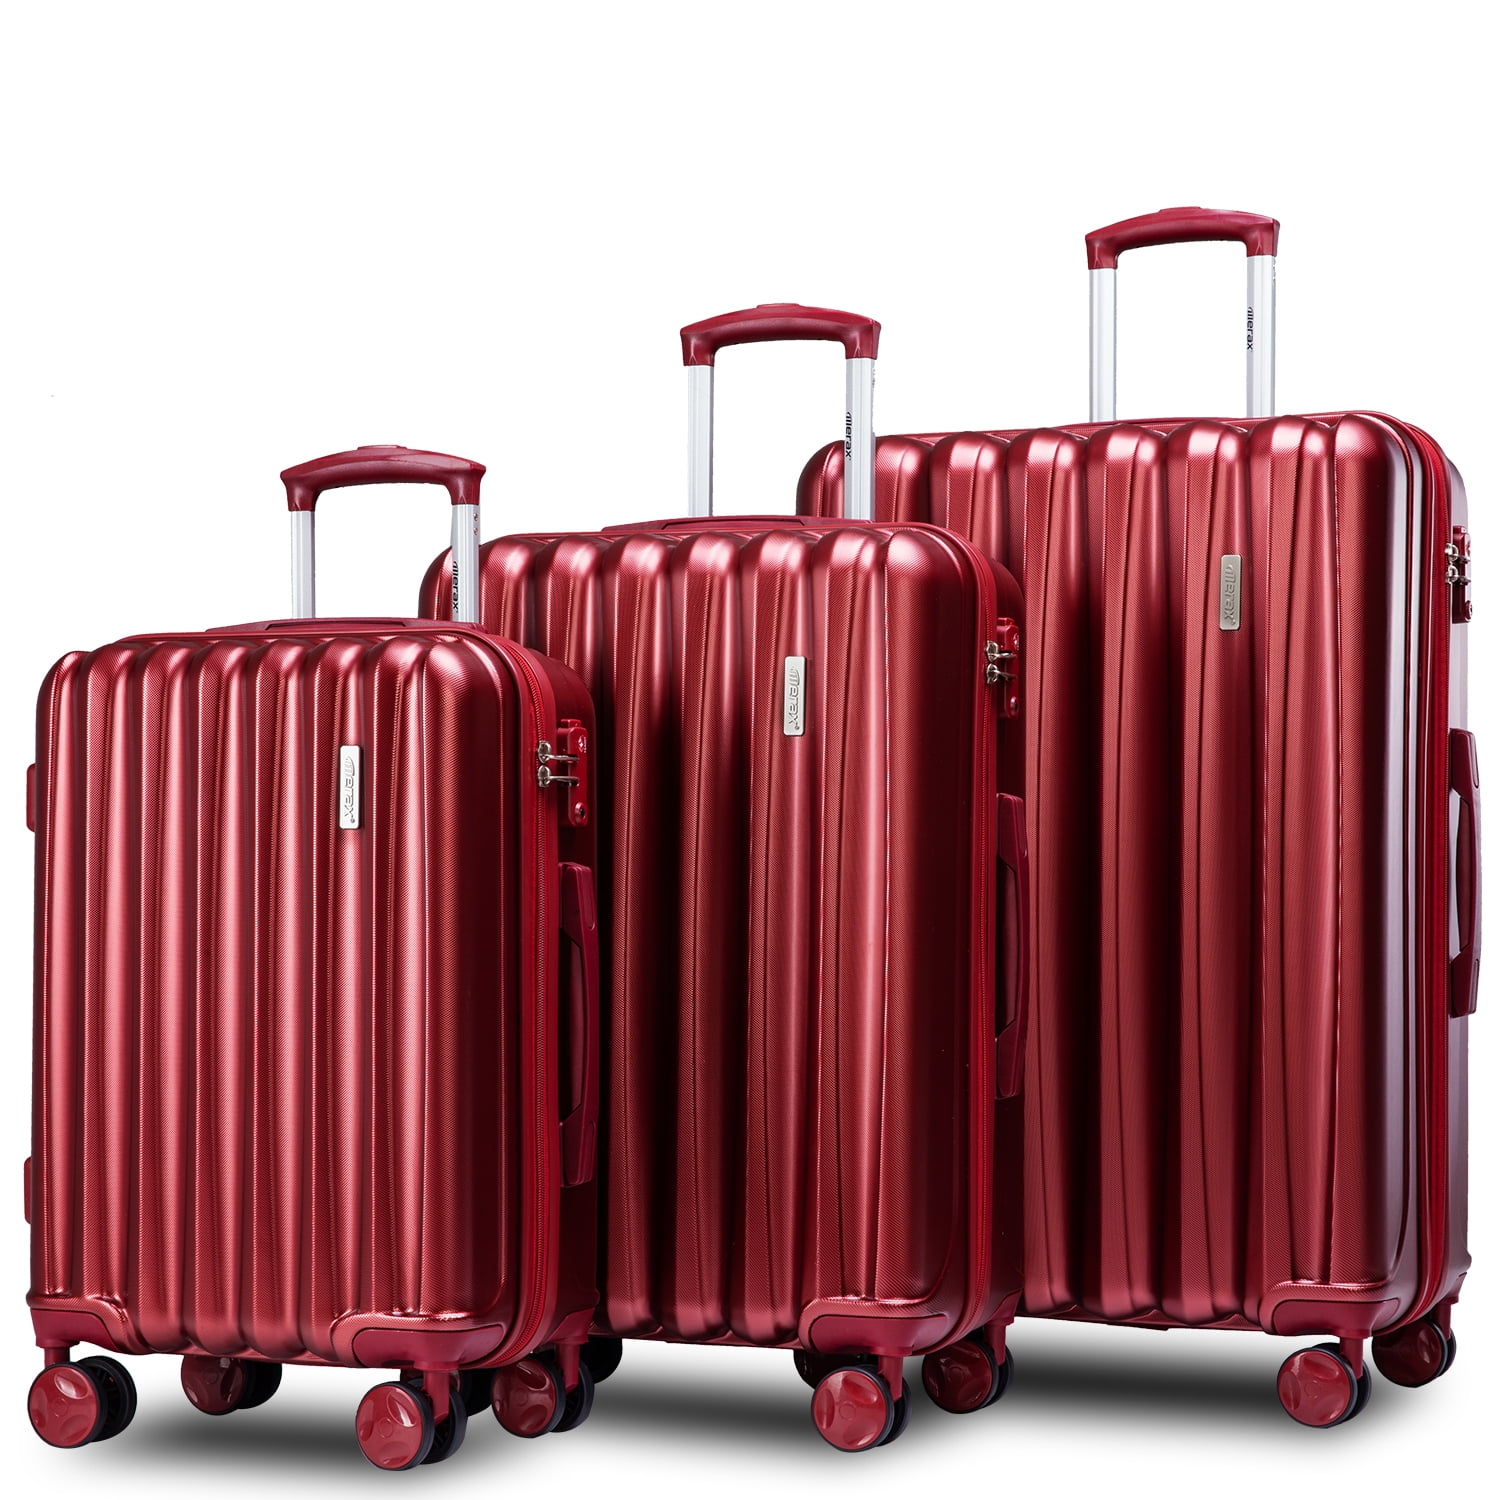 Segmart - Luggage Sets 3 Pack on Clearance, Portable Carryon Suitcase with TSA Lock, ABS ...